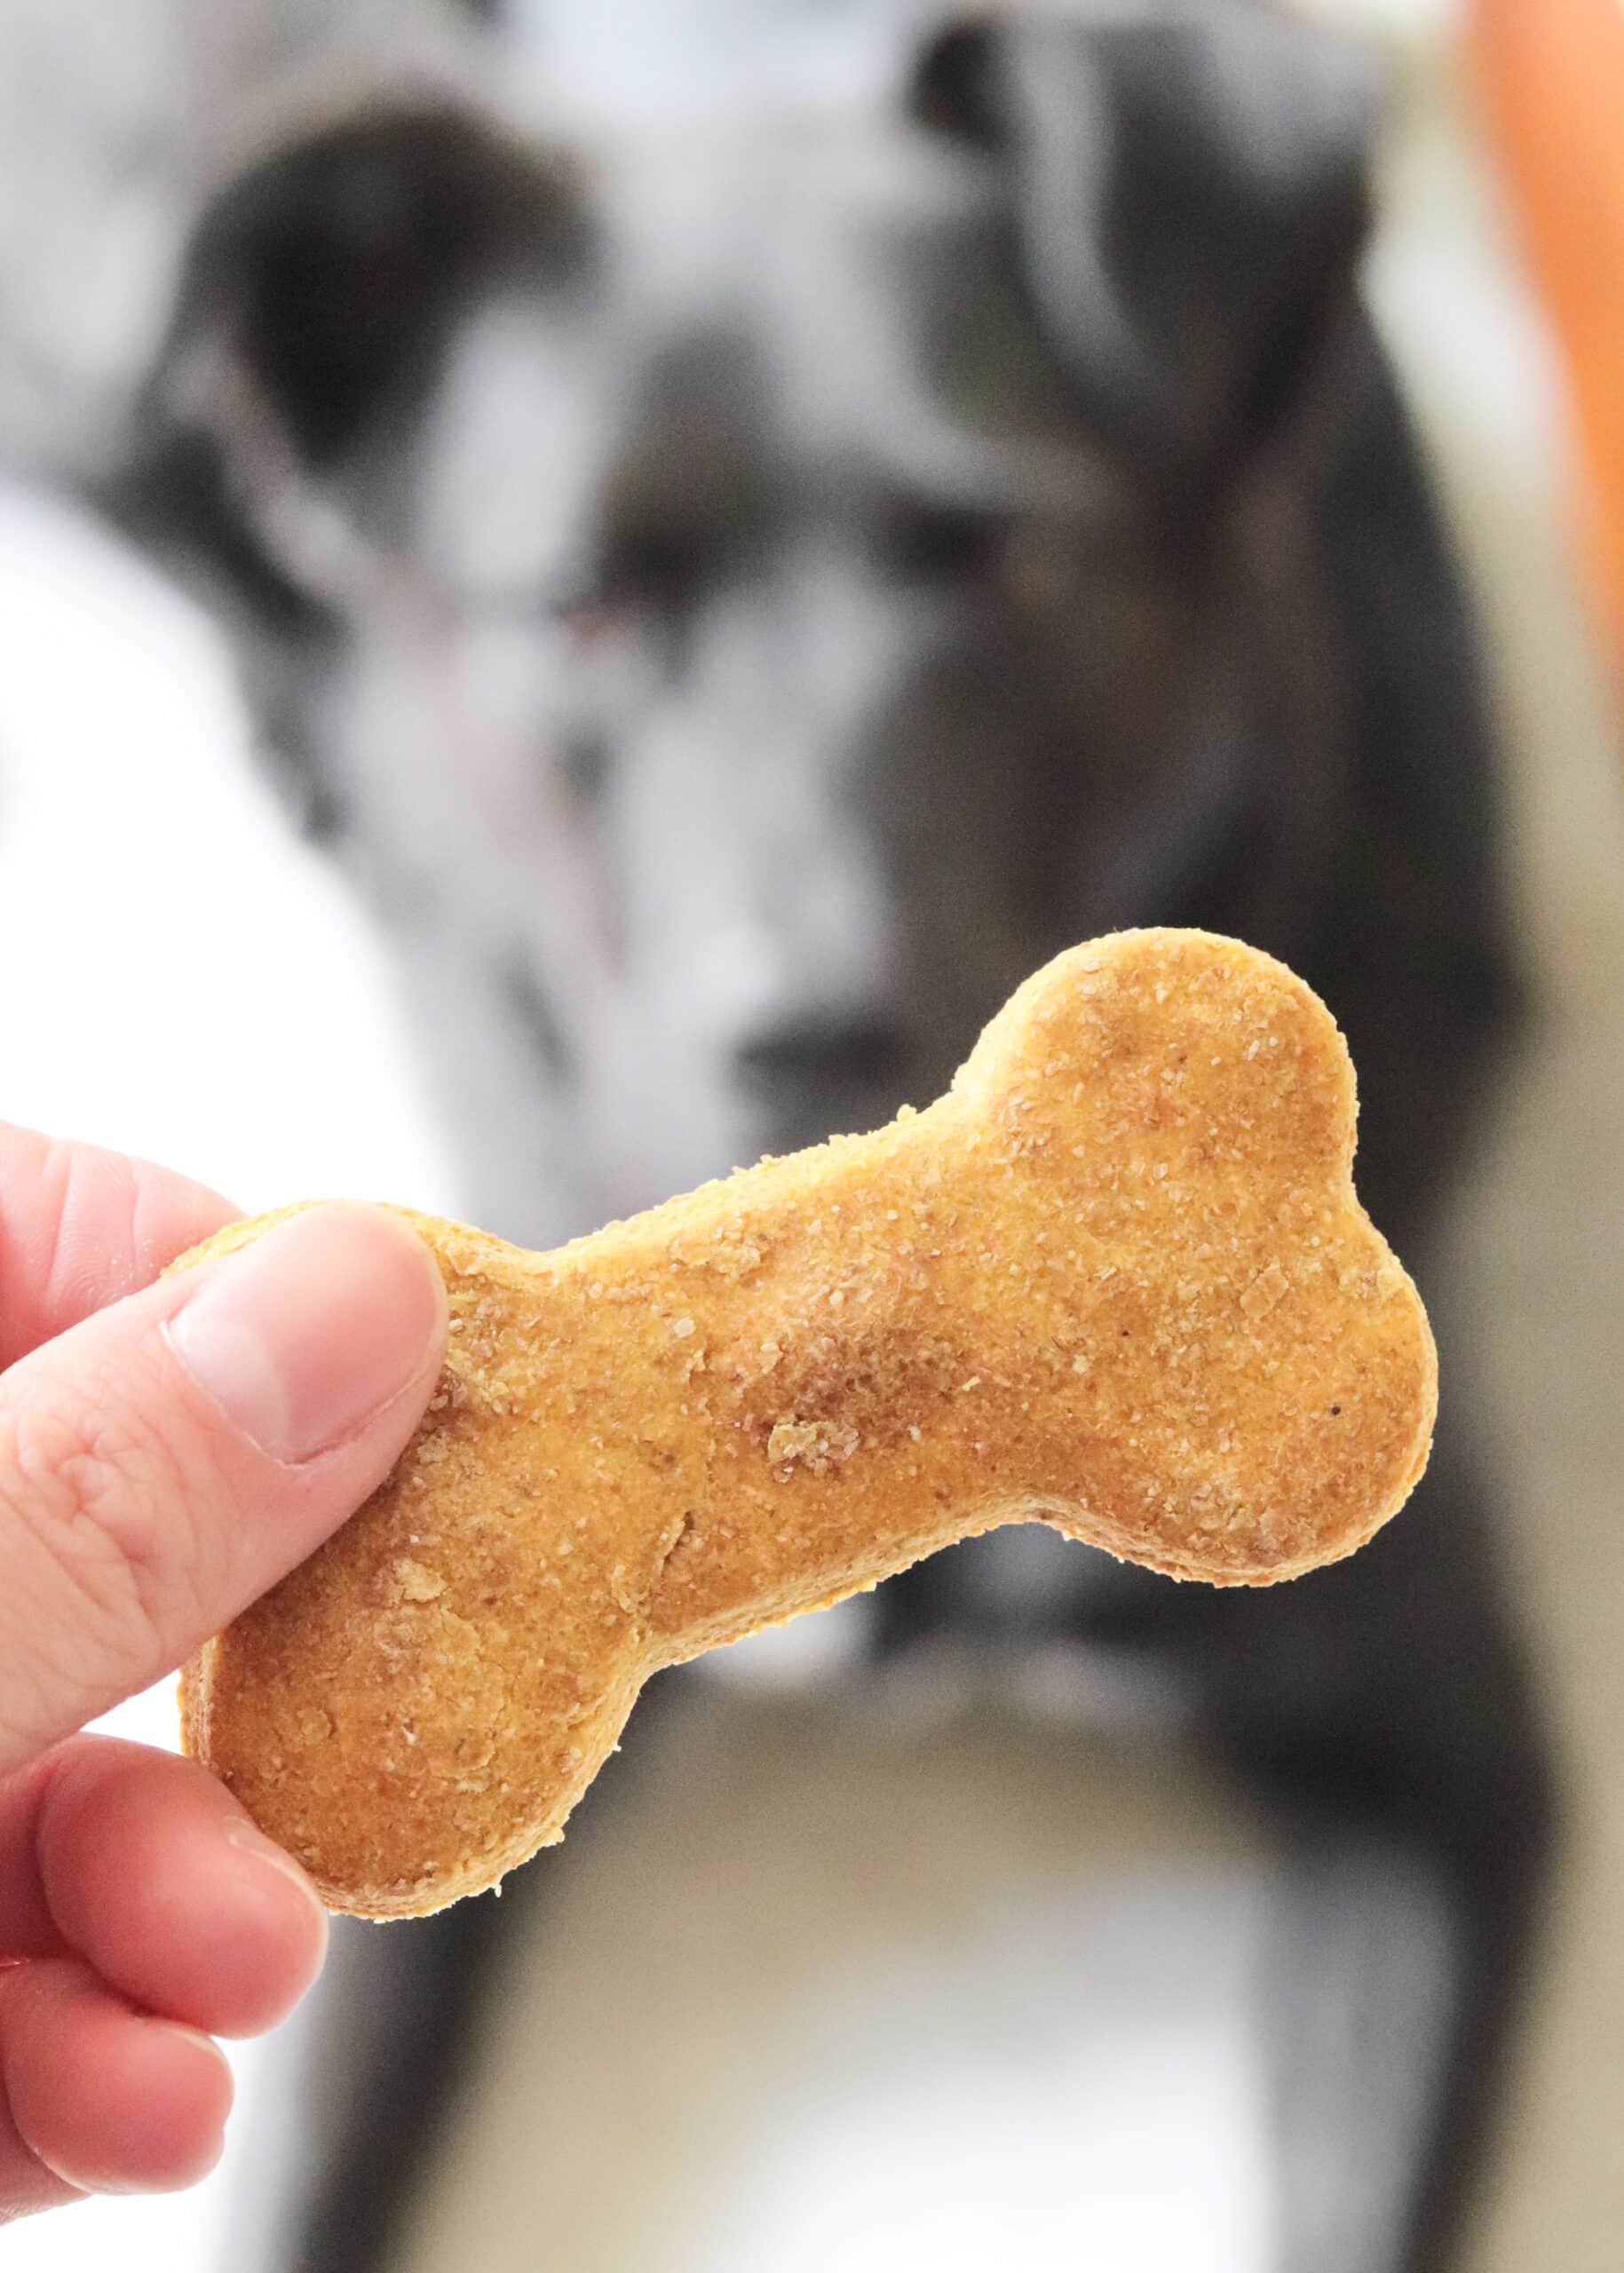 Hand holding a homemade dog treat with puppy in background